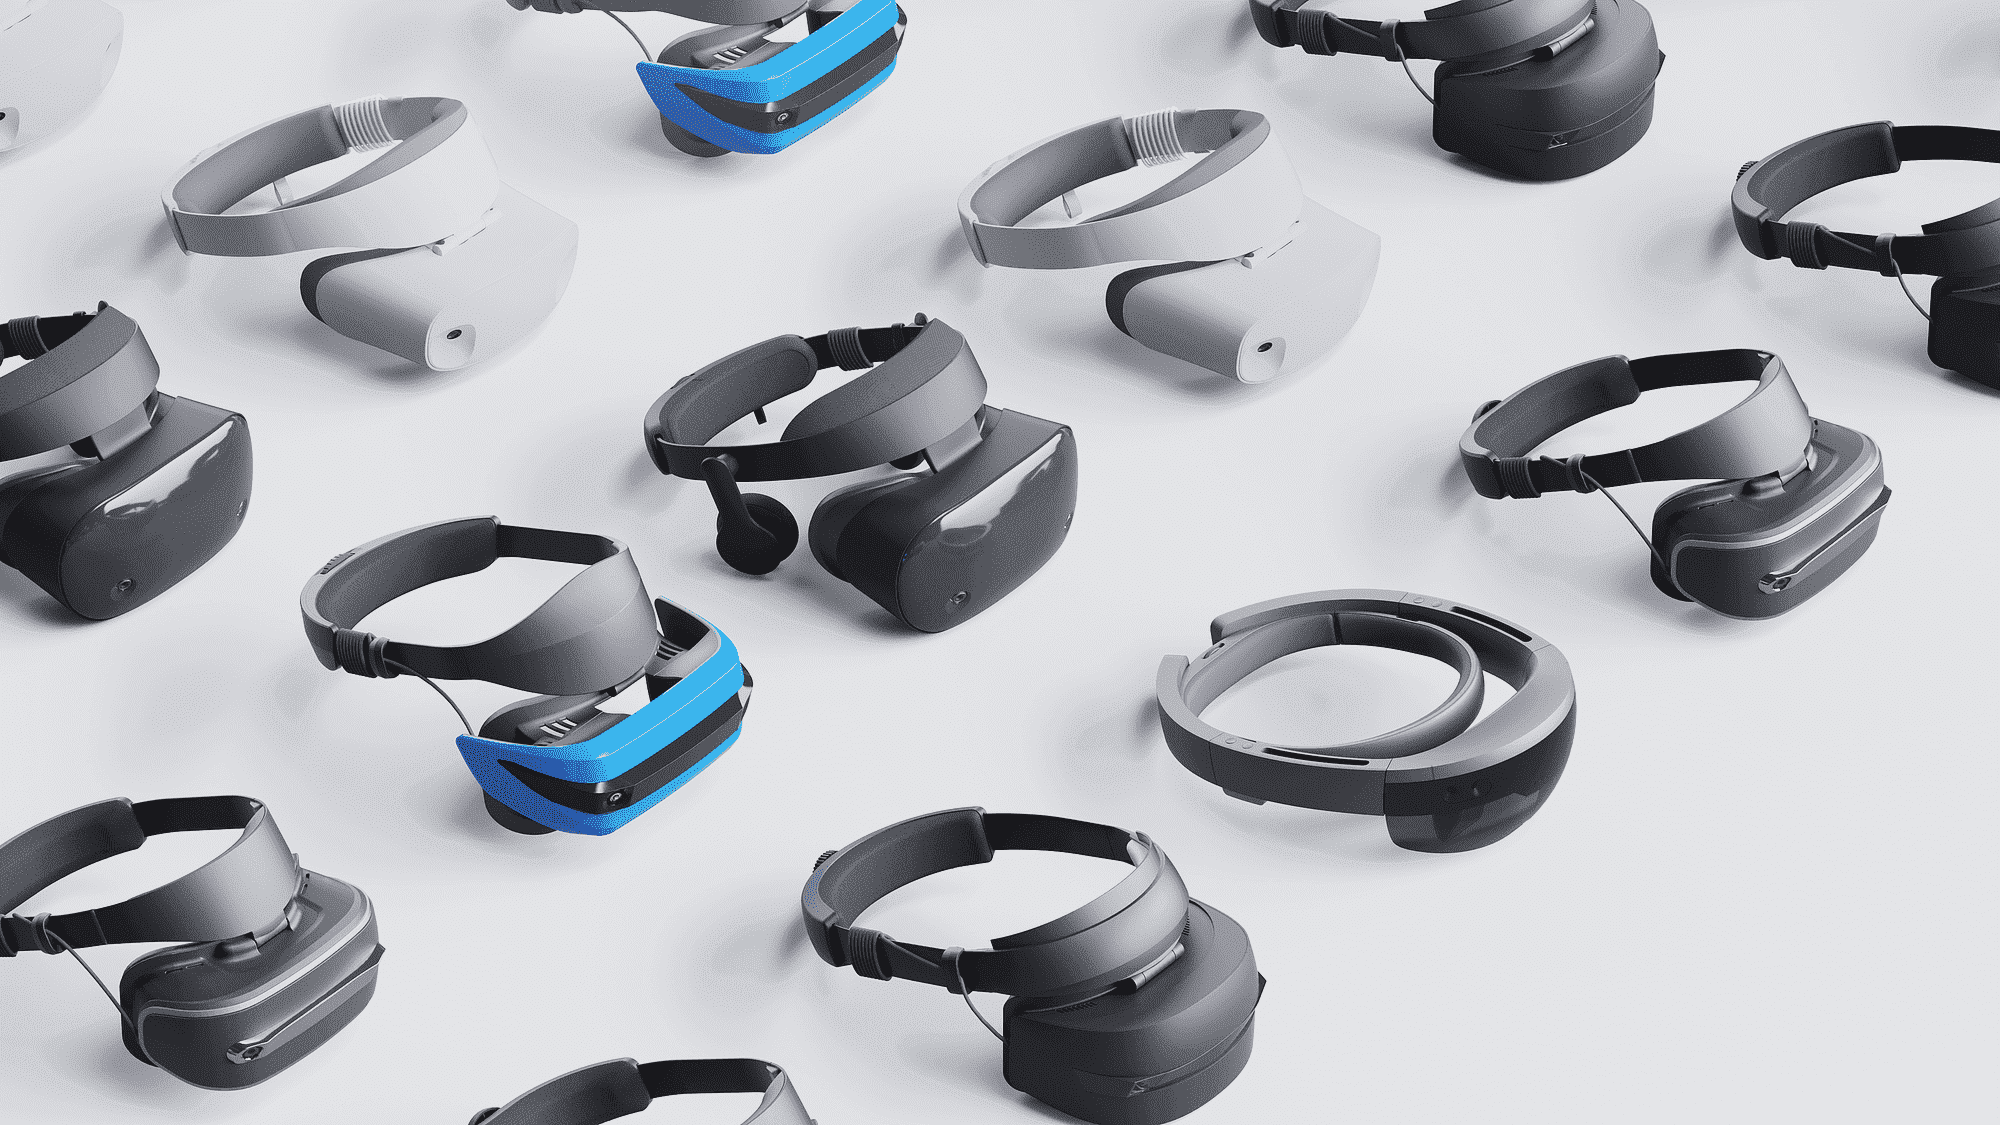 Samsung HMD Odyssey+ is a new Windows Mixed Reality headset 0a0457fc5a5116bcffbb969fbc359cb5.png